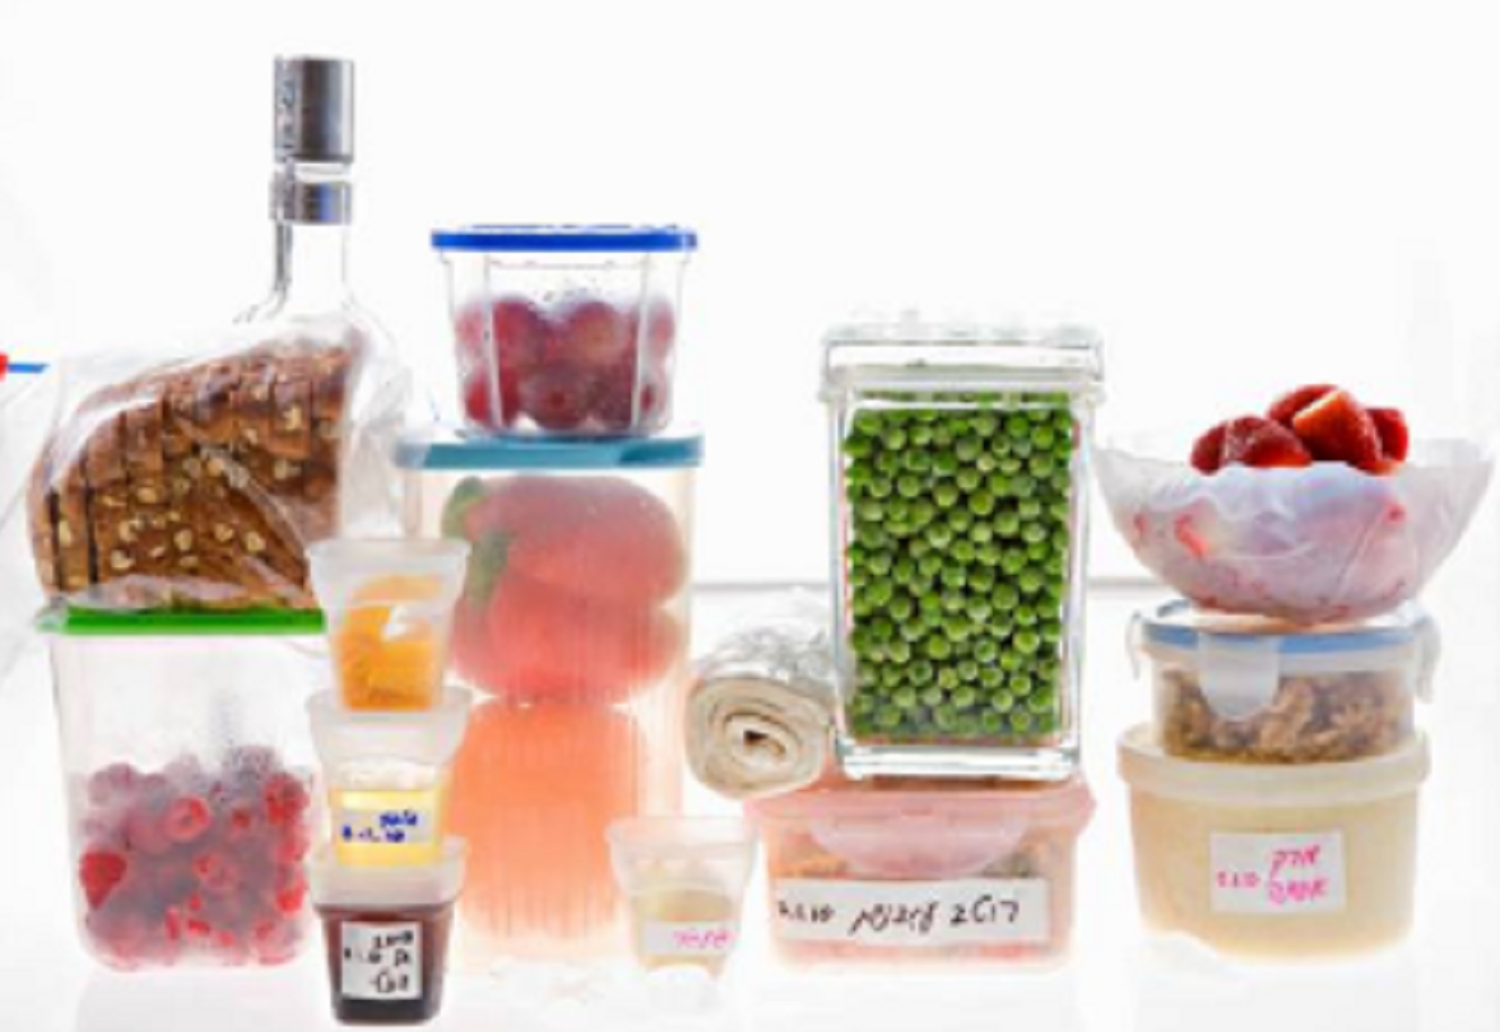 10 Best Meal-Prep Containers for 2020 - Glass & Plastic Meal-Prep Containers